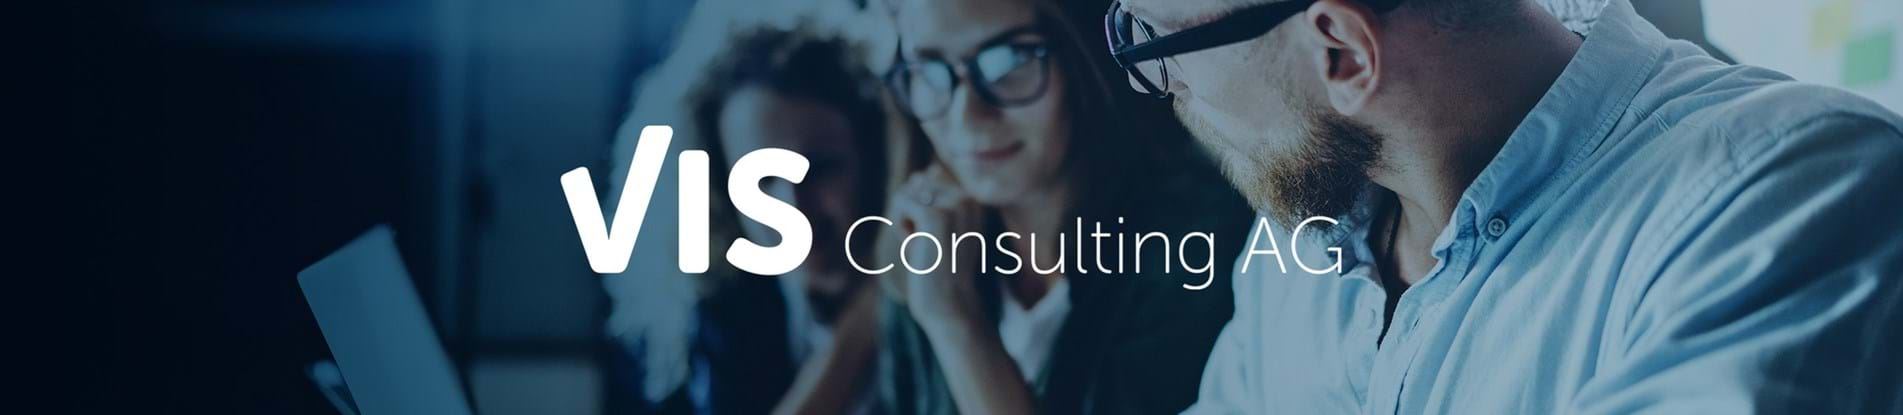 VIS Consulting AG logo